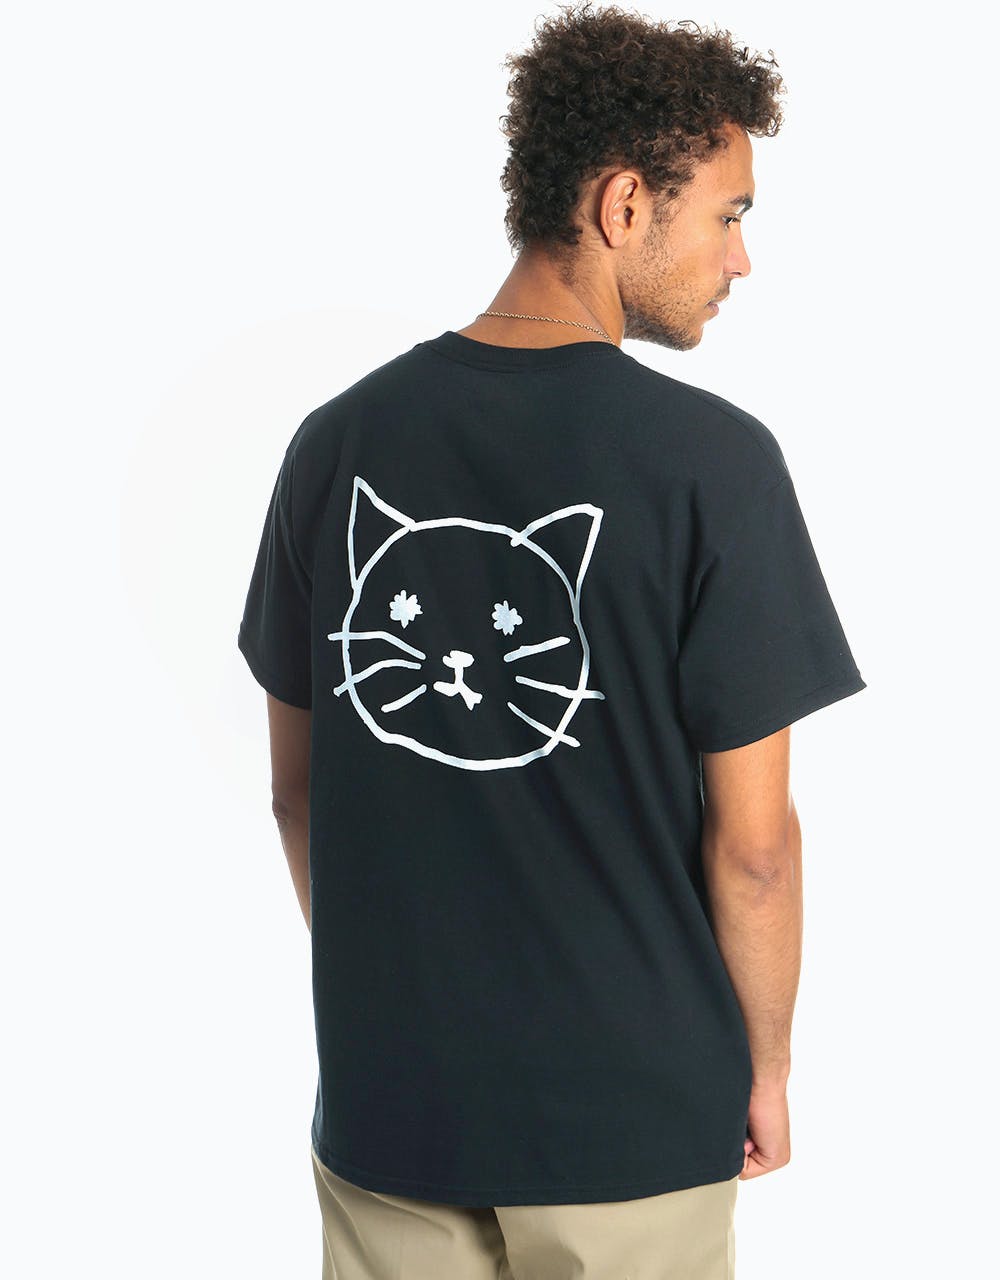 Route One Pussy T-Shirt - Black